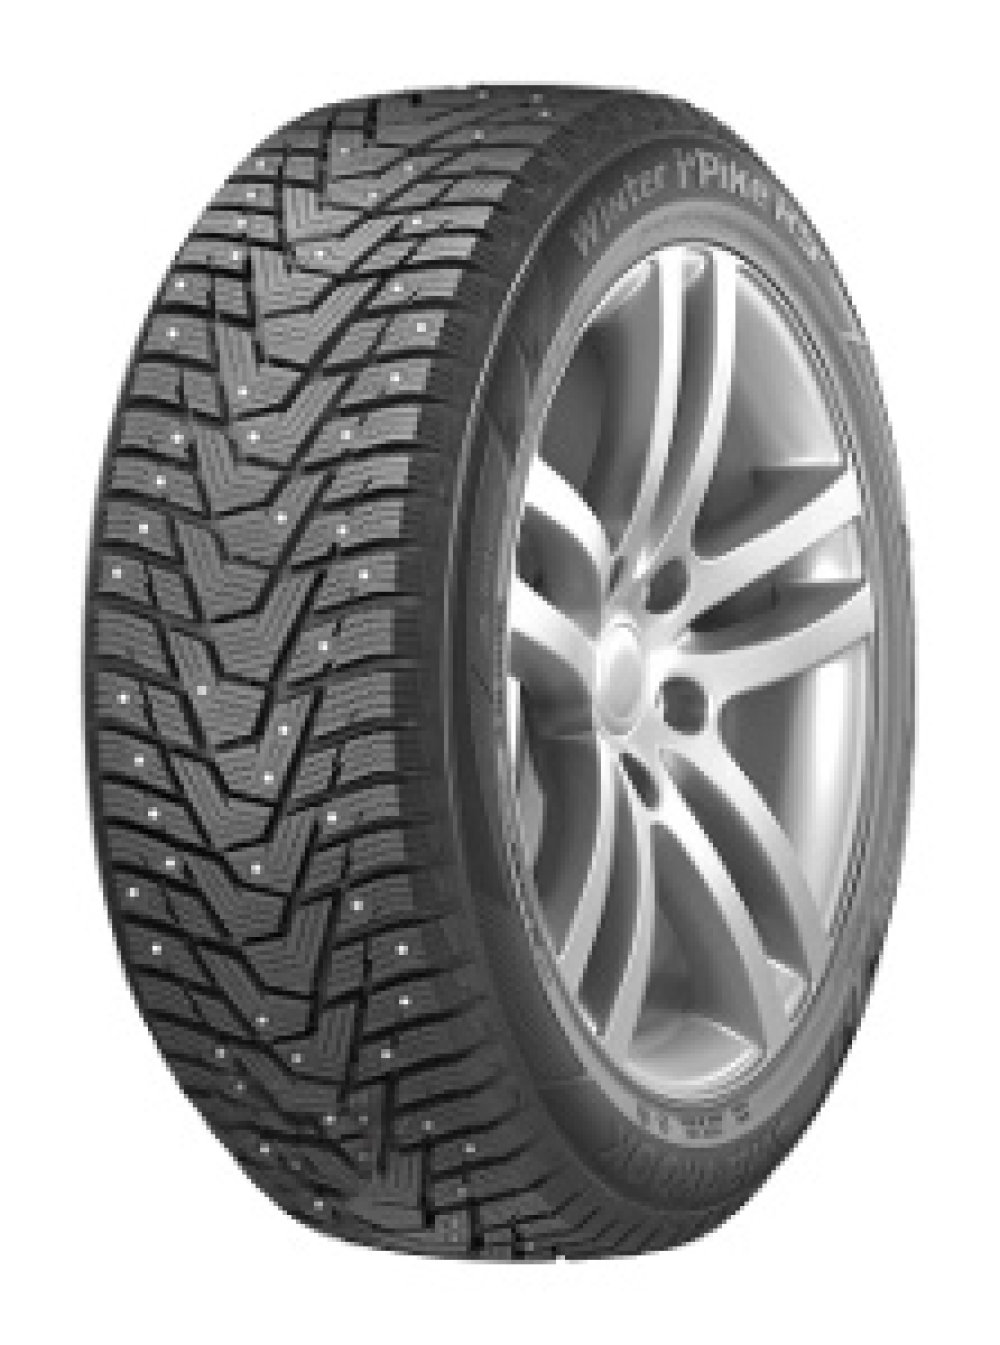 Image of        Hankook Winter I*Pike RS2 W429 ( 245/50 R18 104T XL, pneumatico chiodato, SBL )